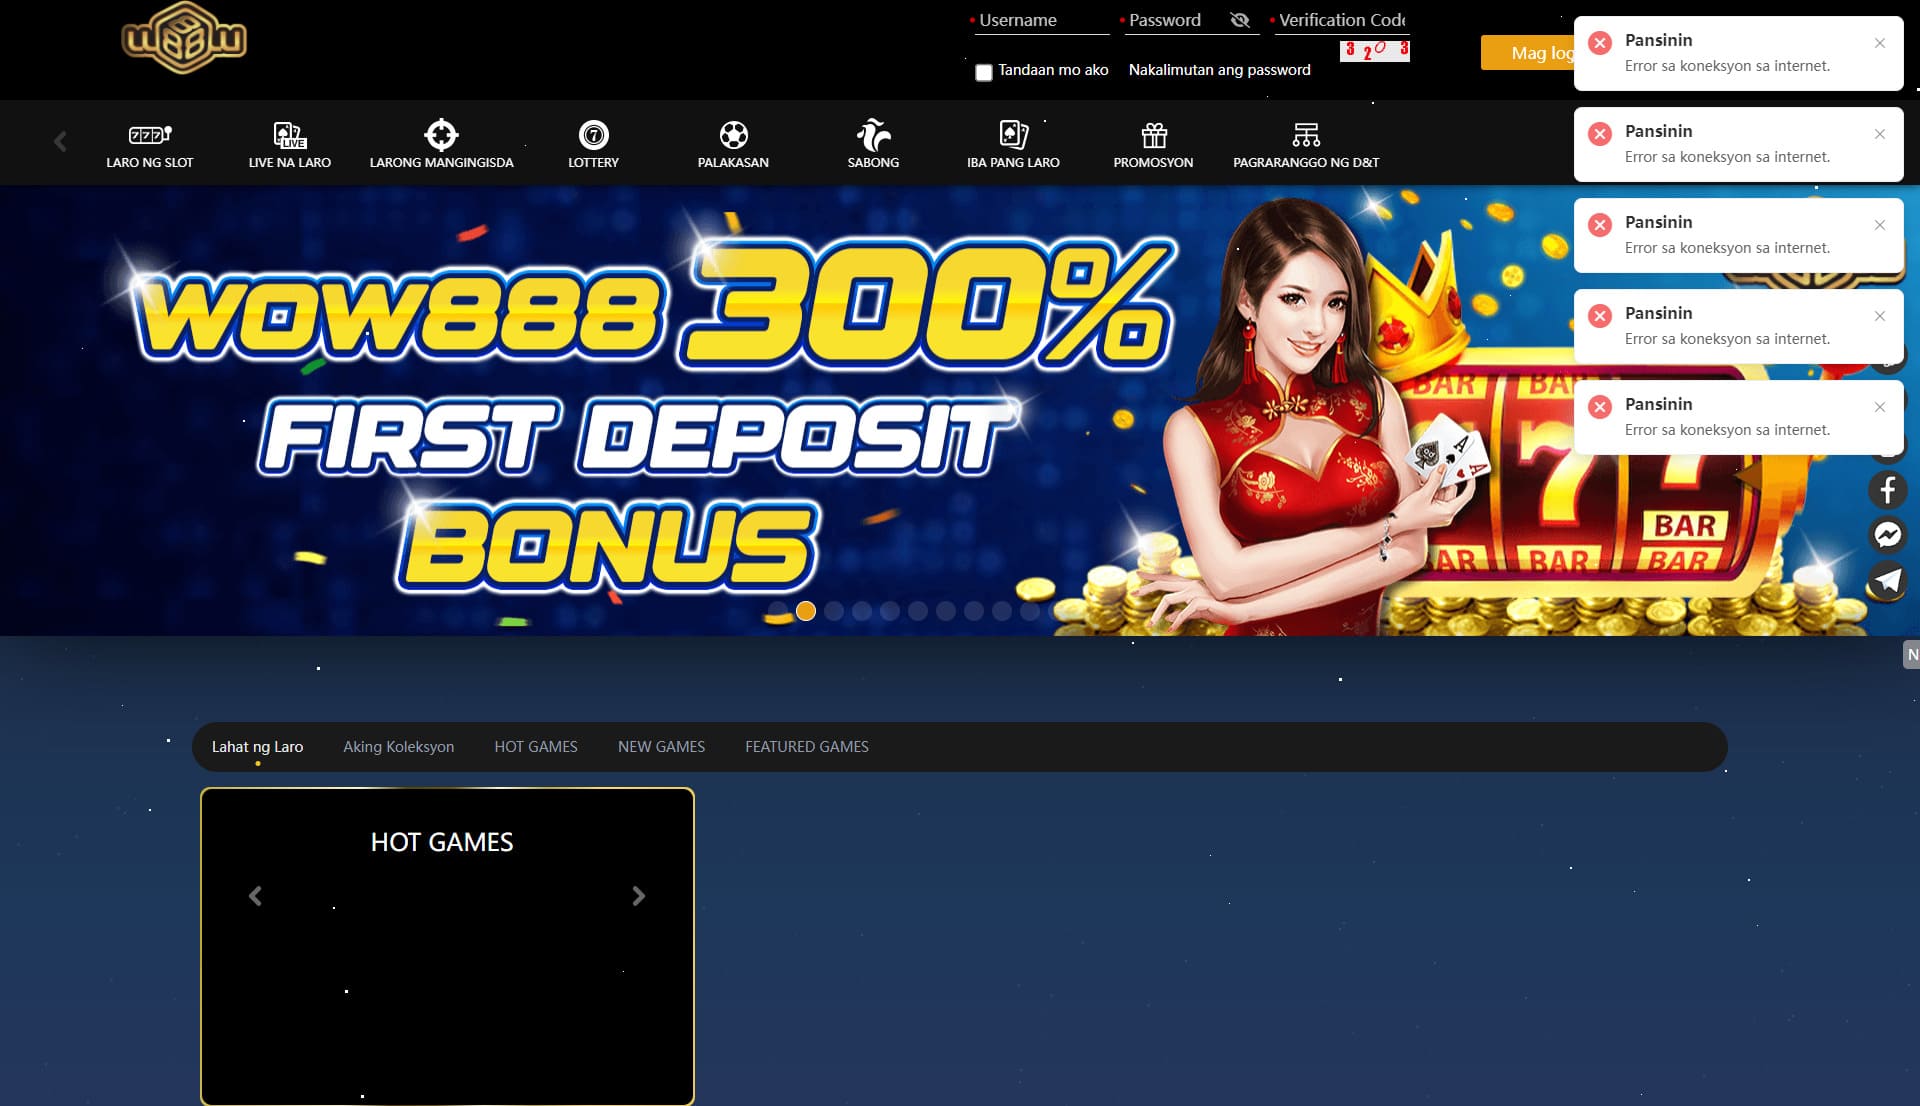 5. Wow888 – est New Online Casino Ranking for Slots & Specialty Titles